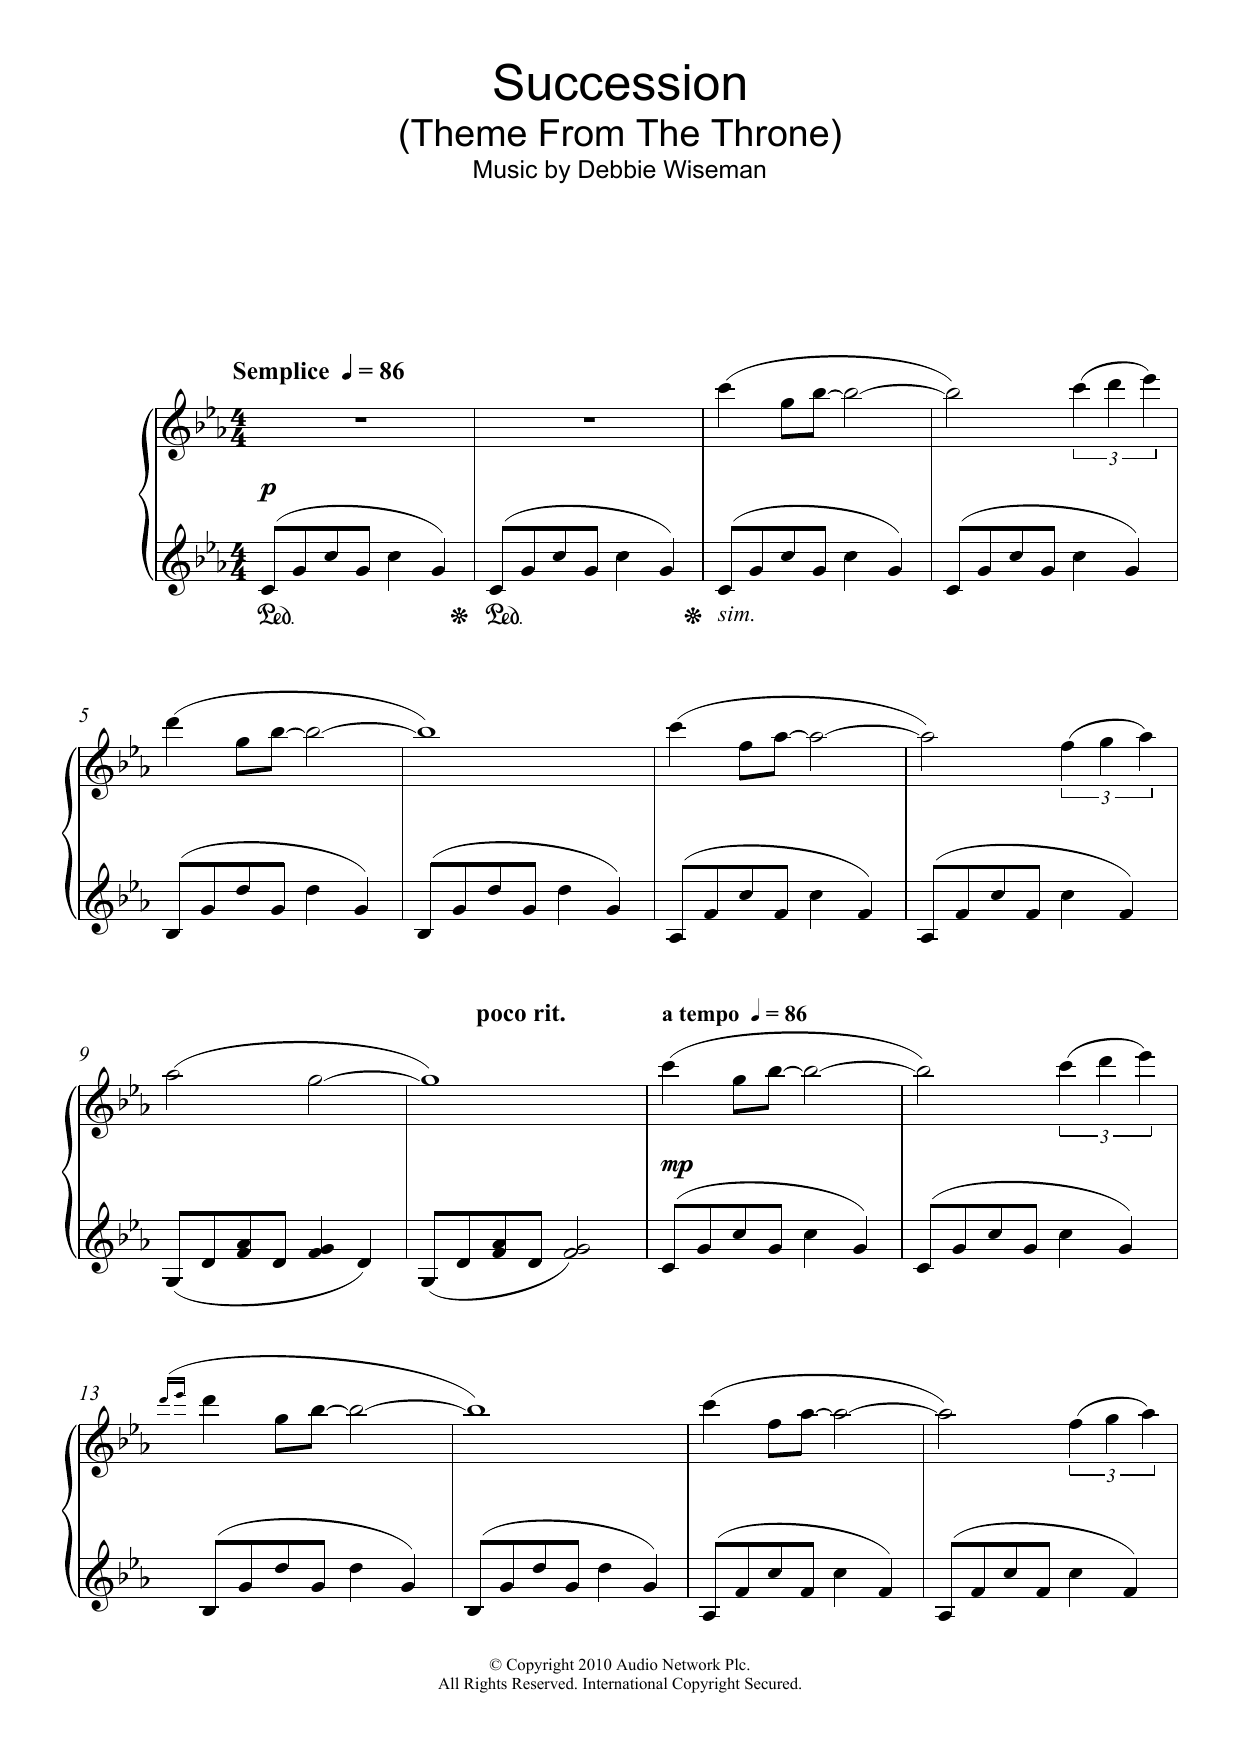 Succession (Theme From The Throne) sheet music